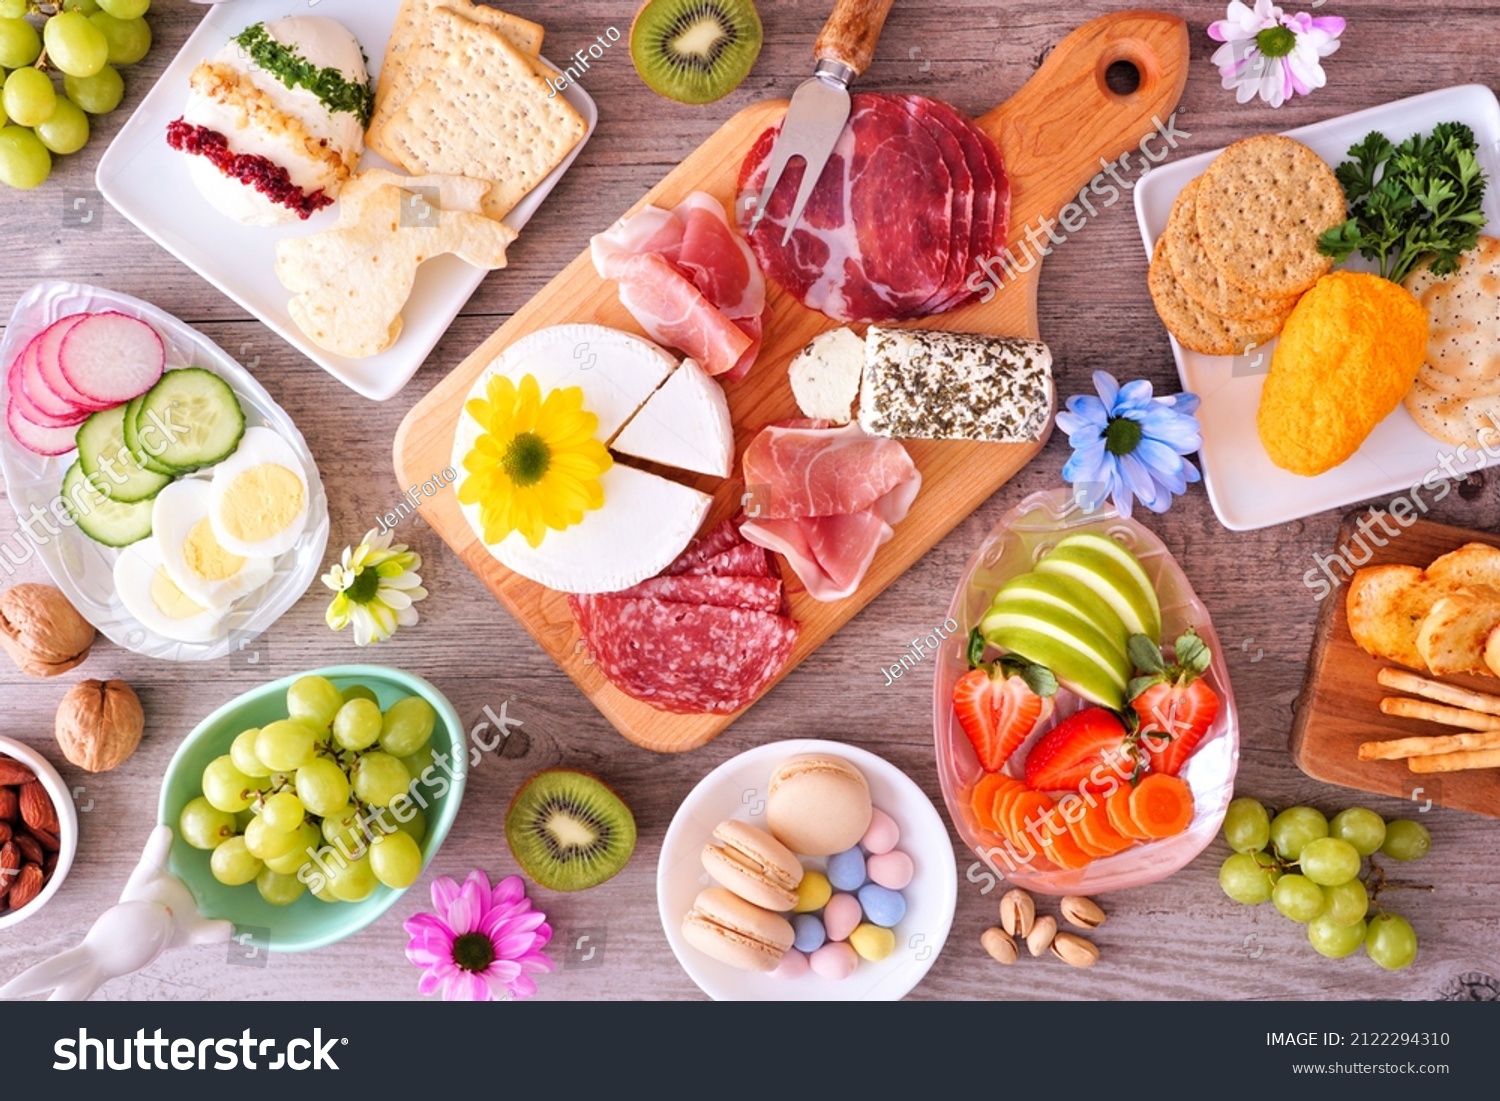 Spring or Easter theme charcuterie table scene against a wood background. Collection of cheese, meat, fruit and vegetable appetizers. Overhead view. #2122294310